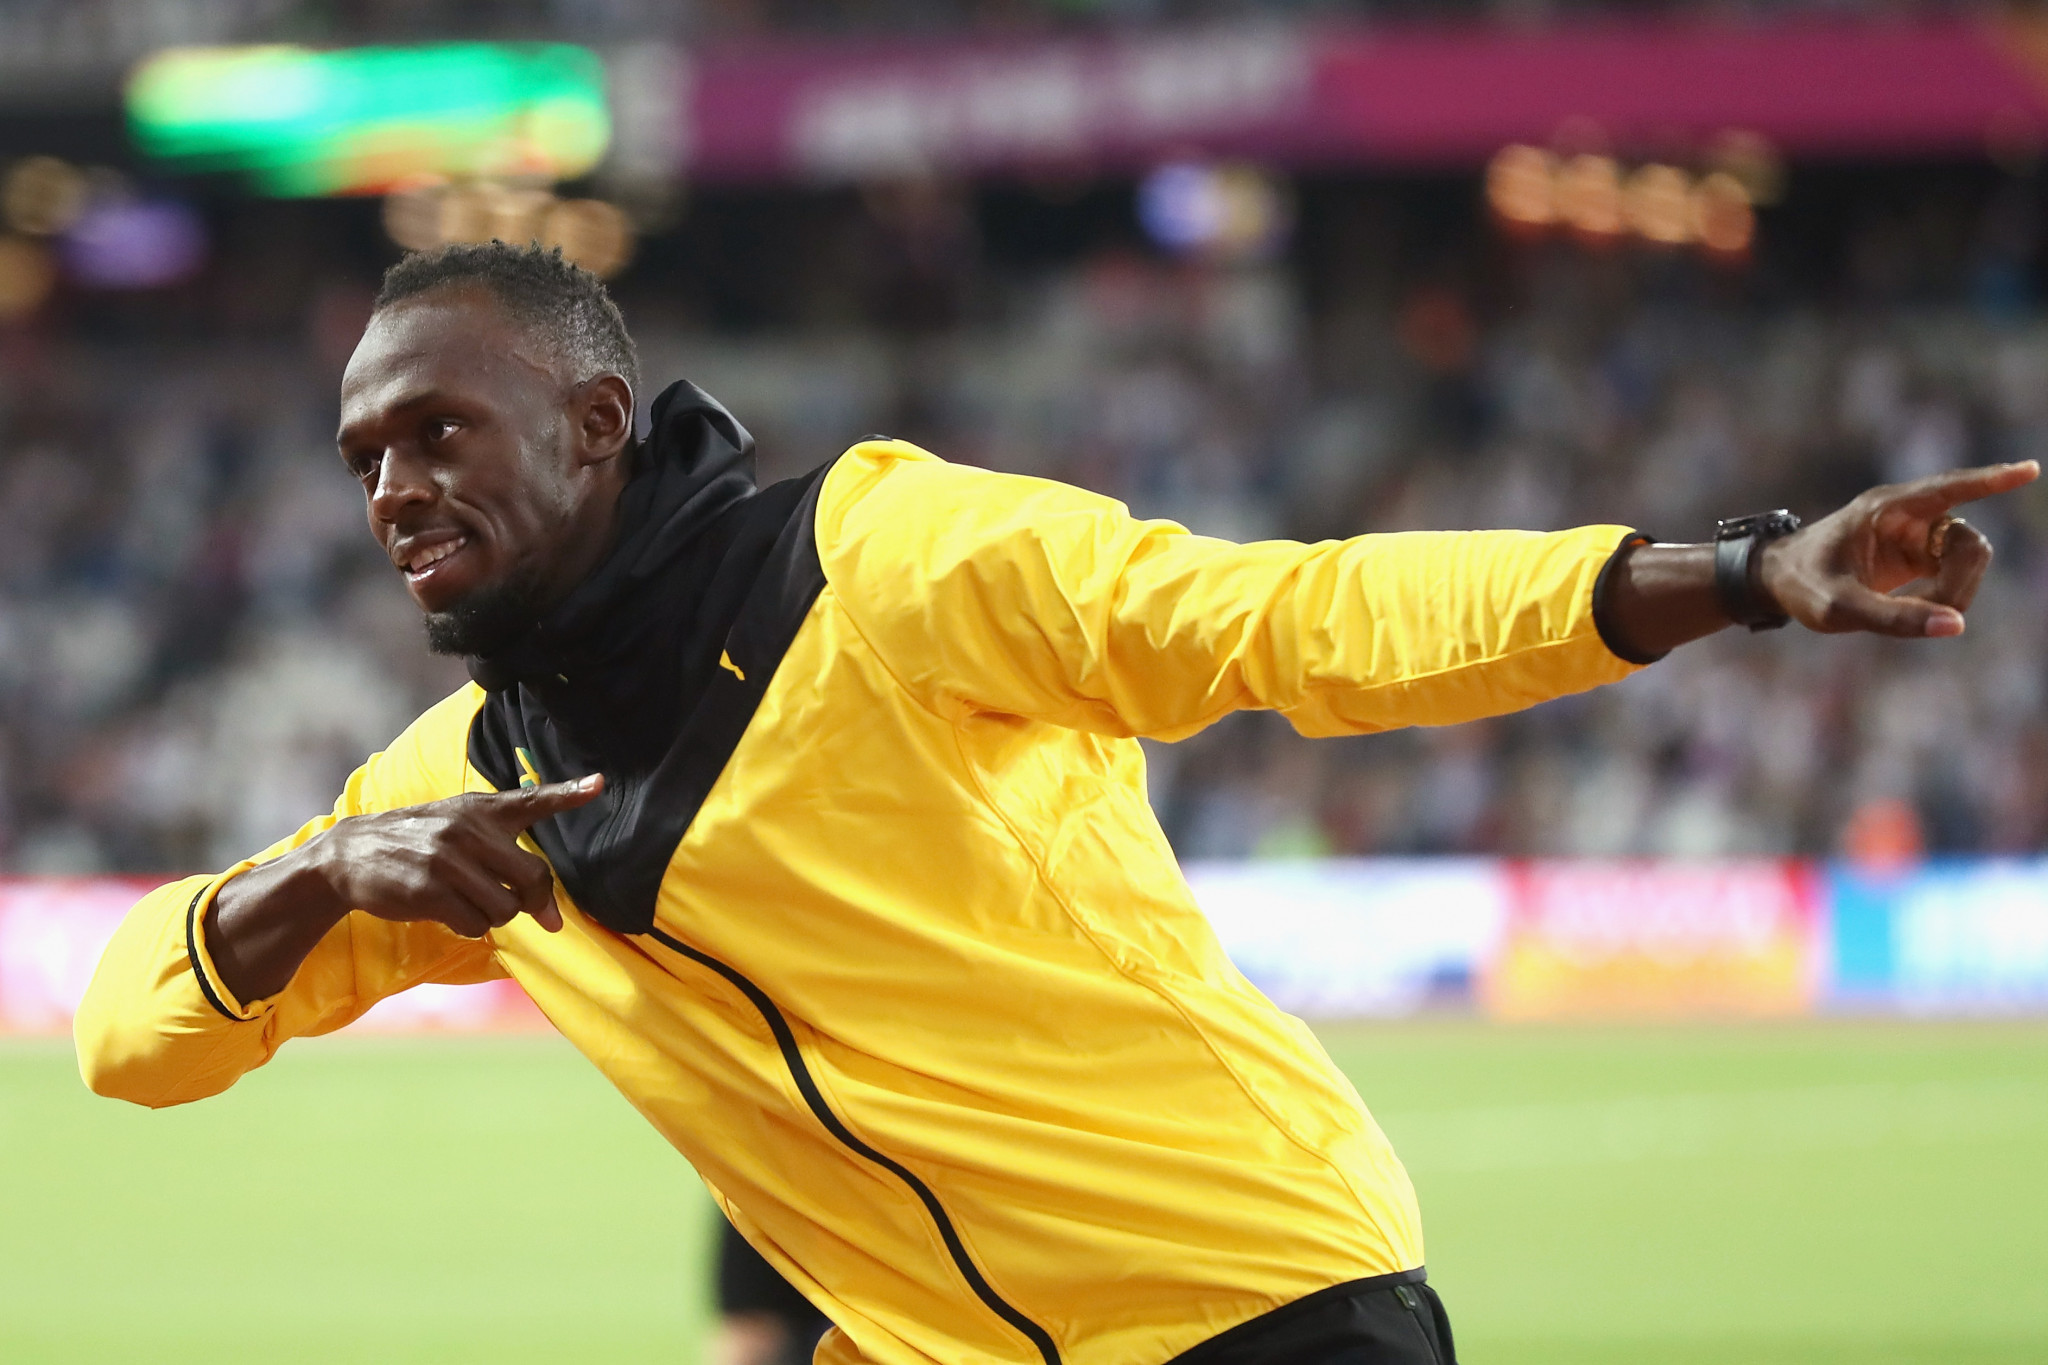 Gold Coast 2018 confident Bolt will be at Commonwealth Games